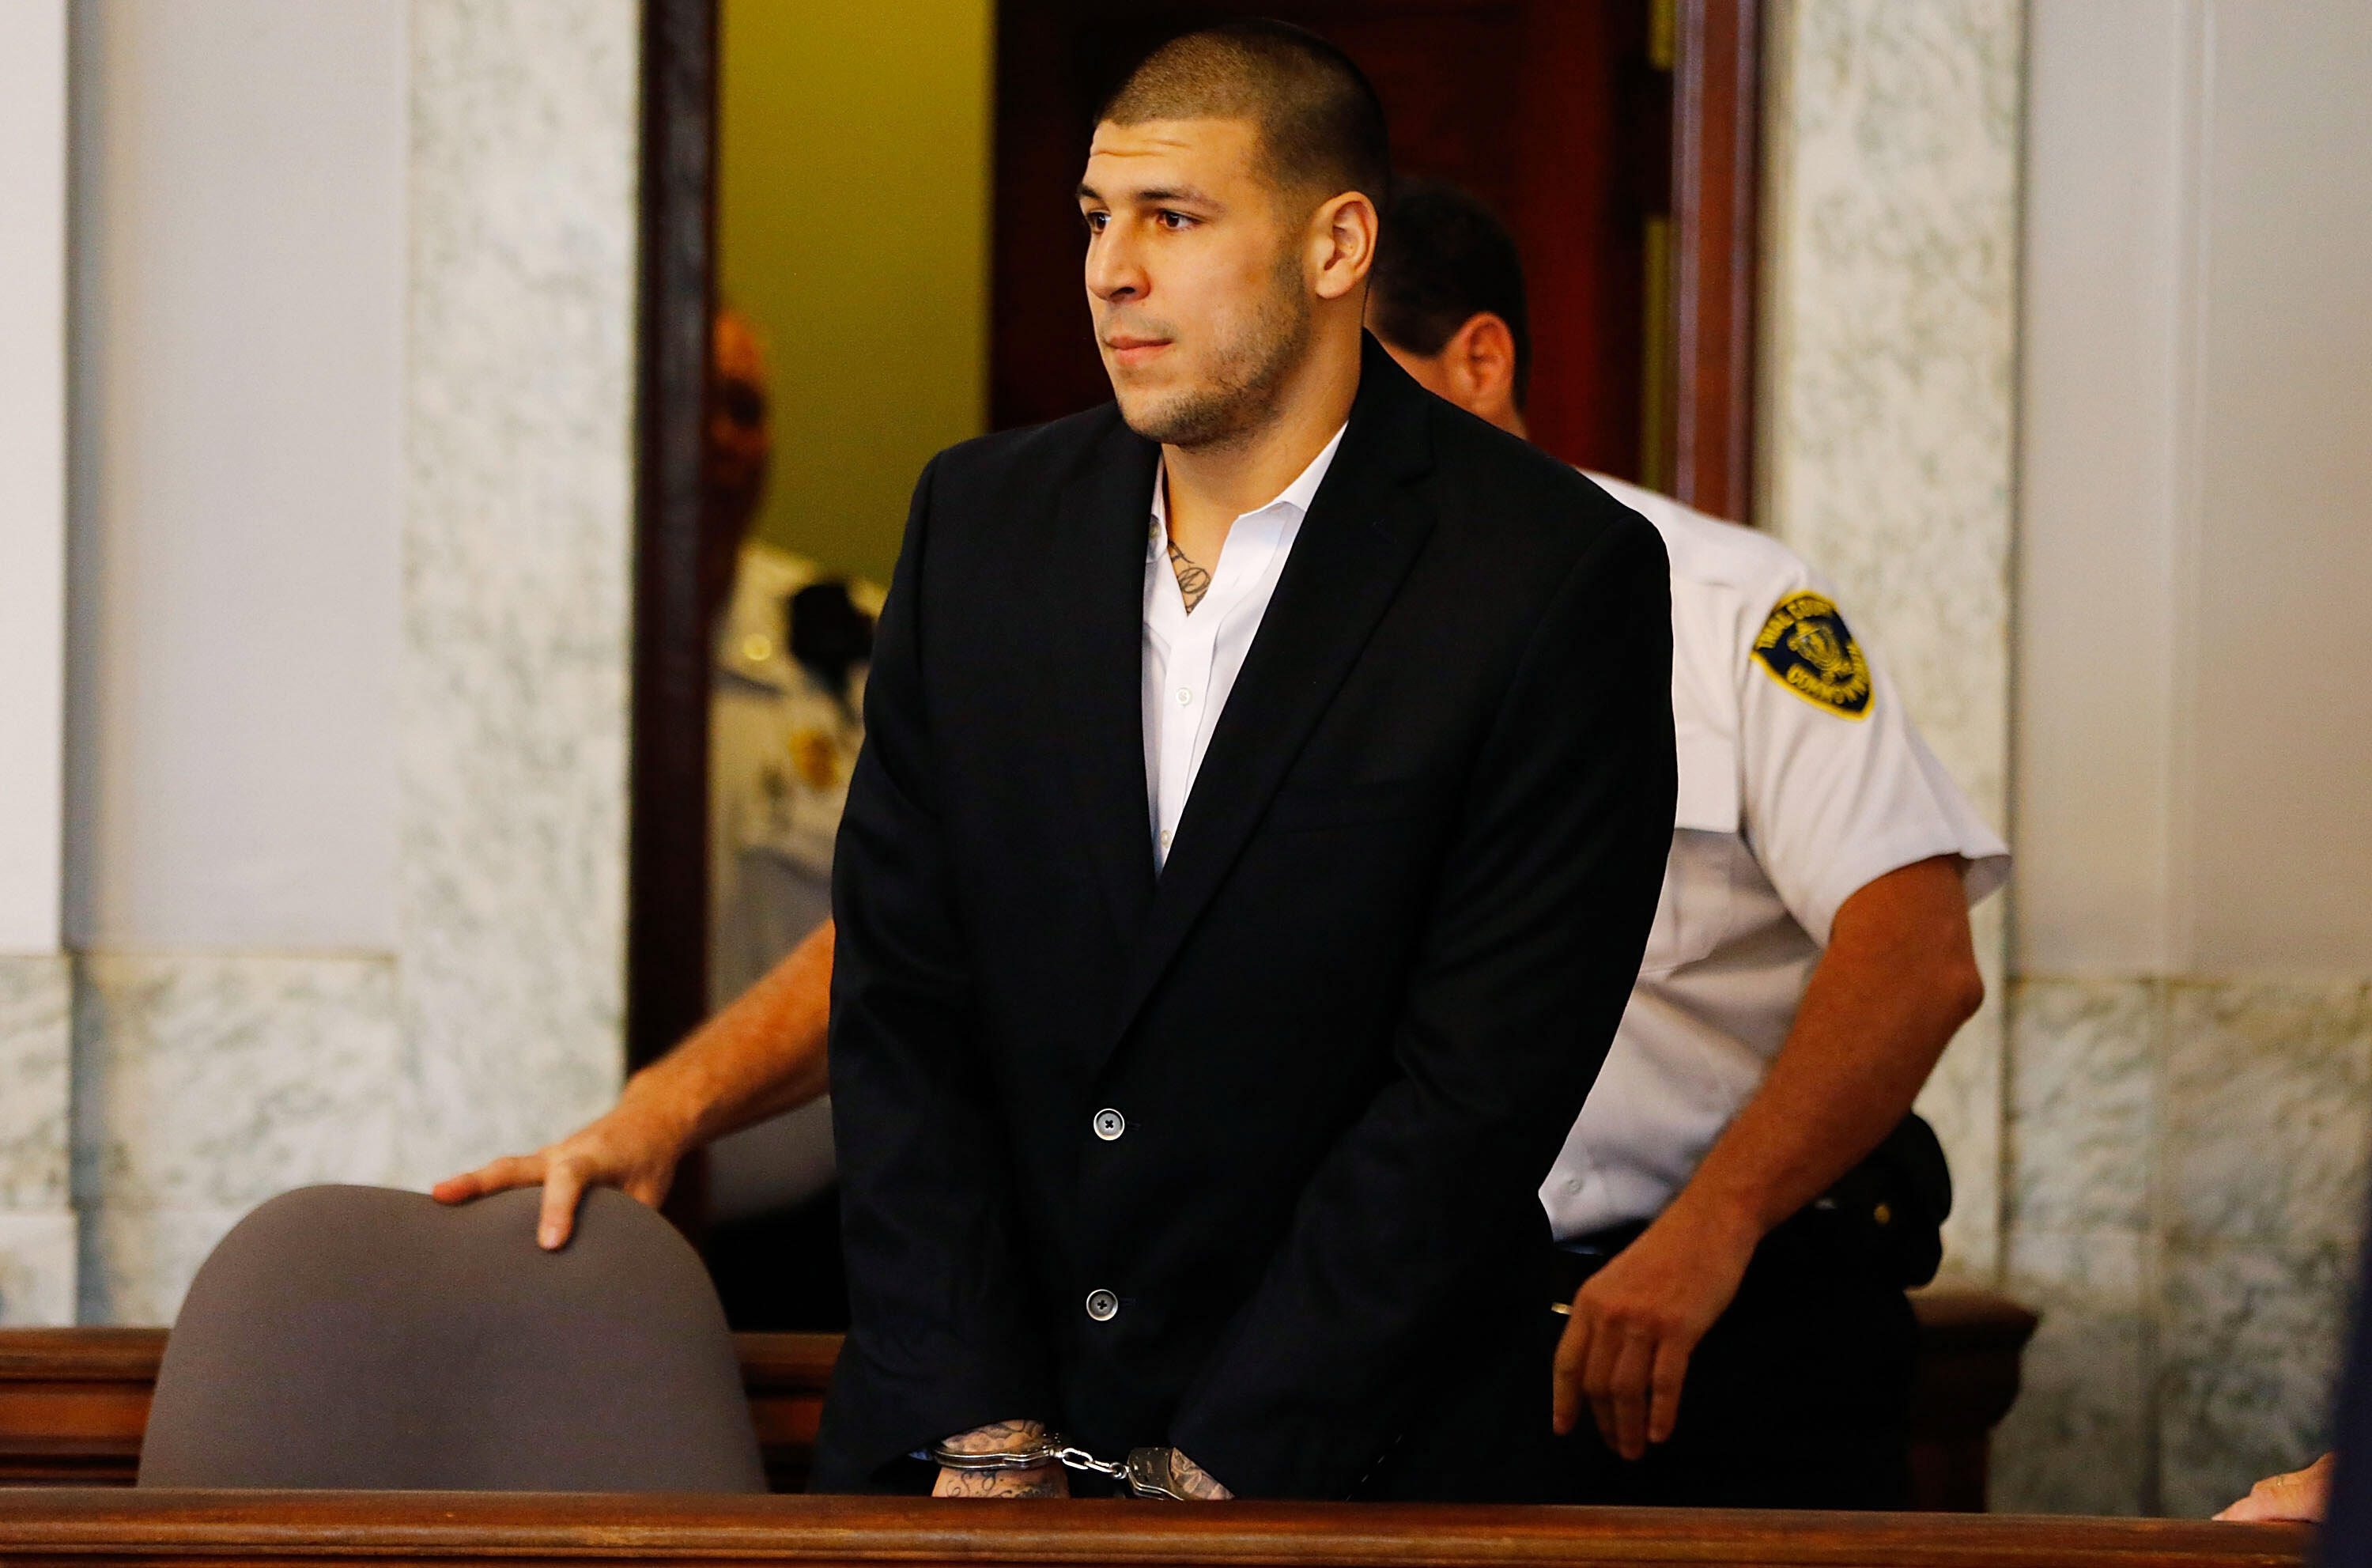 NORTH ATTLEBORO, MA - AUGUST 22: Aaron Hernandez is escorted into the courtroom of the Attleboro District Court for his hearing on August 22, 2013 in North Attleboro, Massachusetts. Former New England Patriot Aaron Hernandez has been indicted on a first-d